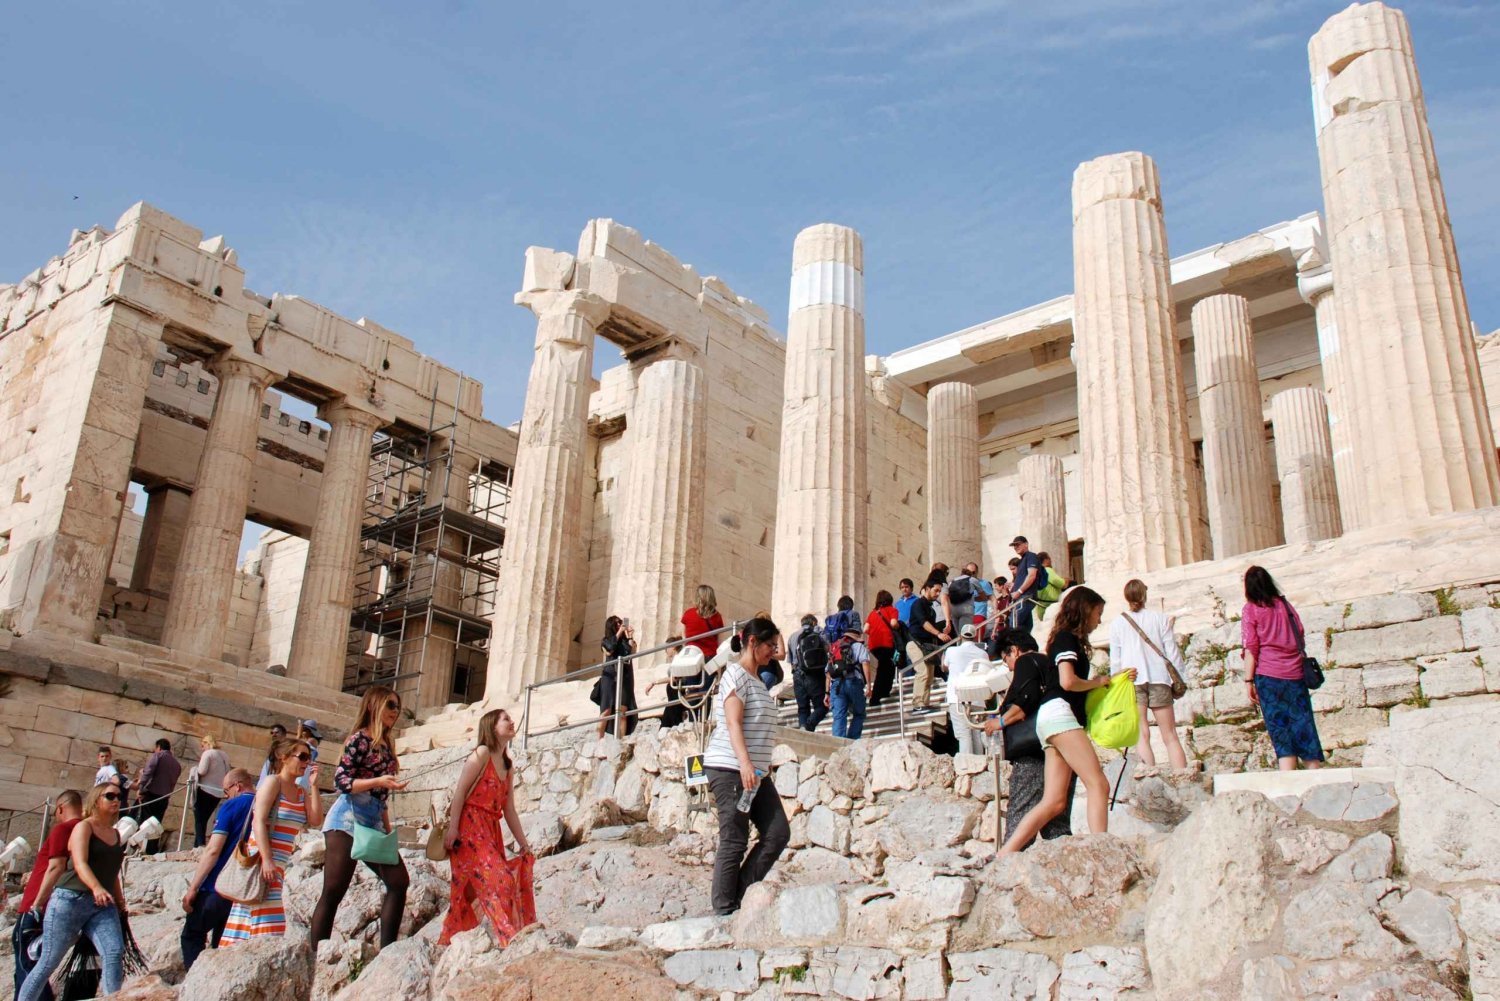 Athens: Acropolis Regular Entry Ticket with a Booking Fee